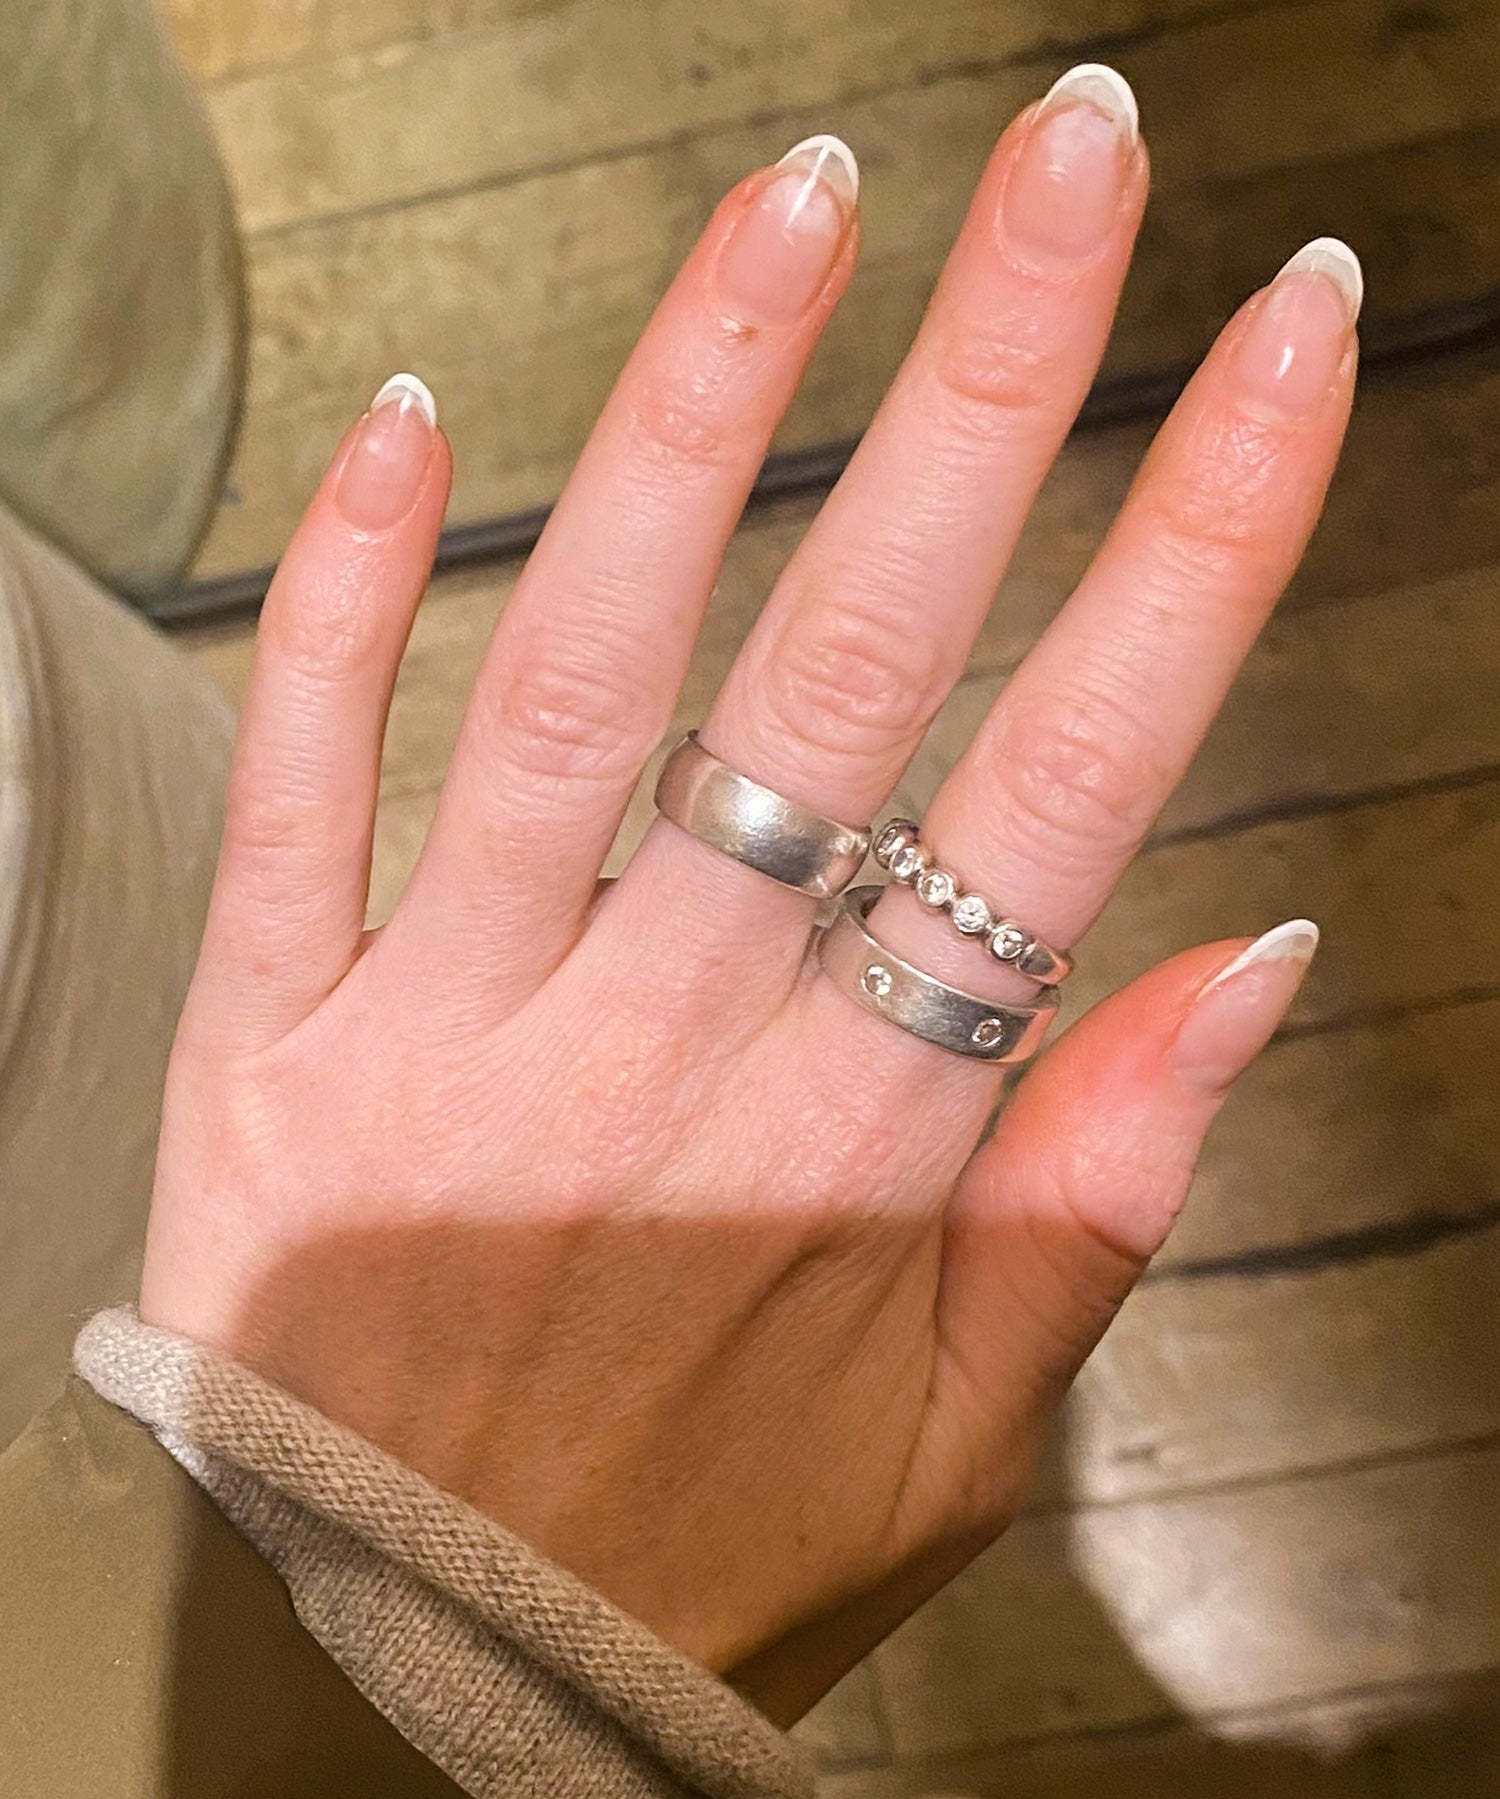 Skinny French manicure: the simple nail trend taking over TikTok